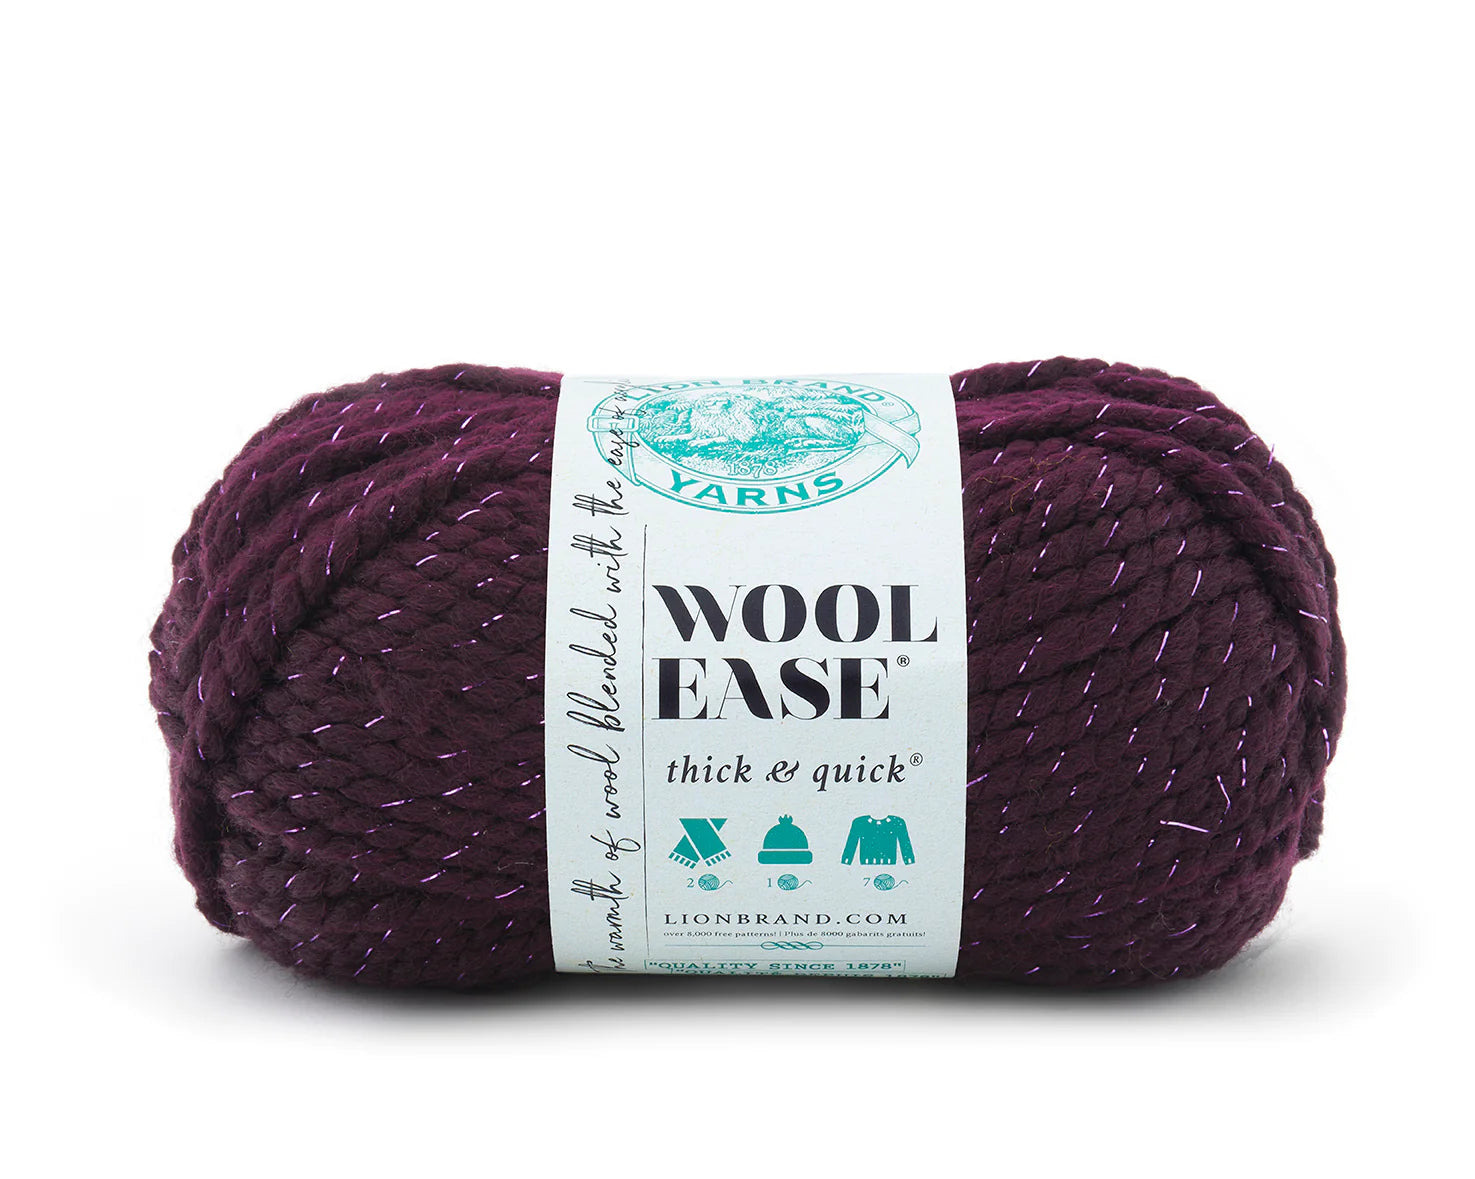 Lion Brand Yarn Wool-Ease Thick & Quick Yarn, Soft and Bulky Yarn for  Knitting, Crocheting, and Crafting, 1 Skein, Spiced Apple